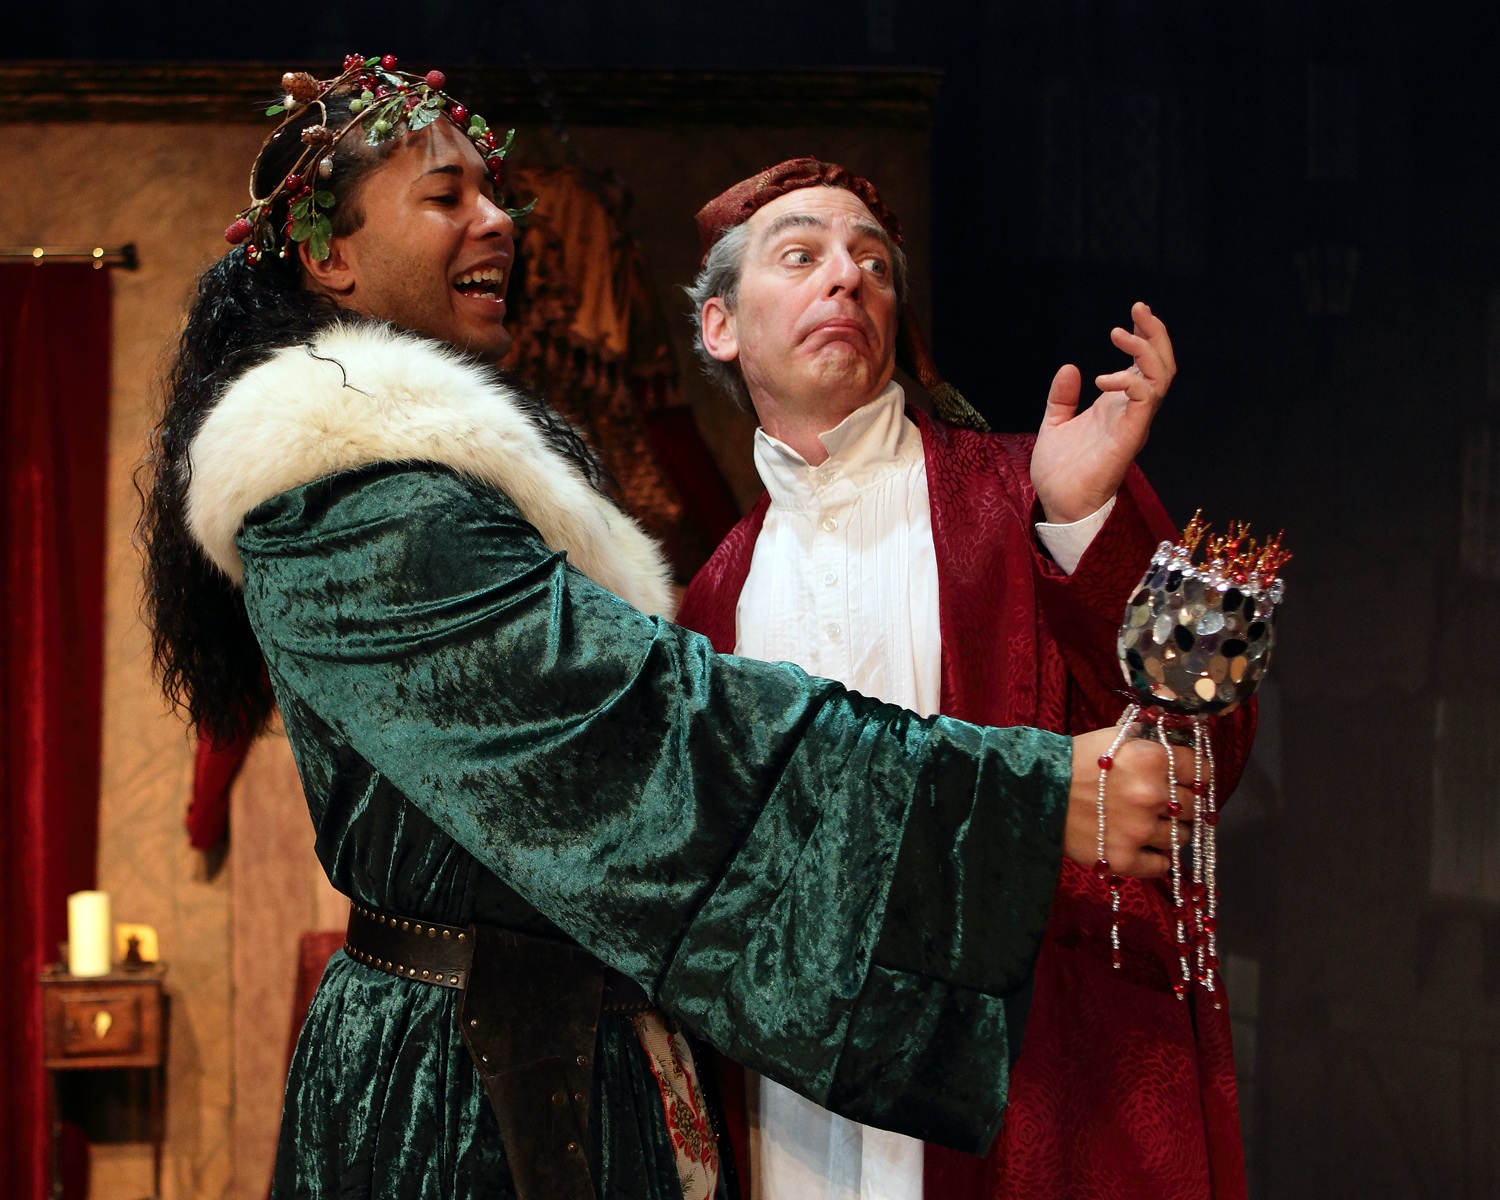 The Little Theatre of Alexandria offers “A Christmas Carol” this holiday